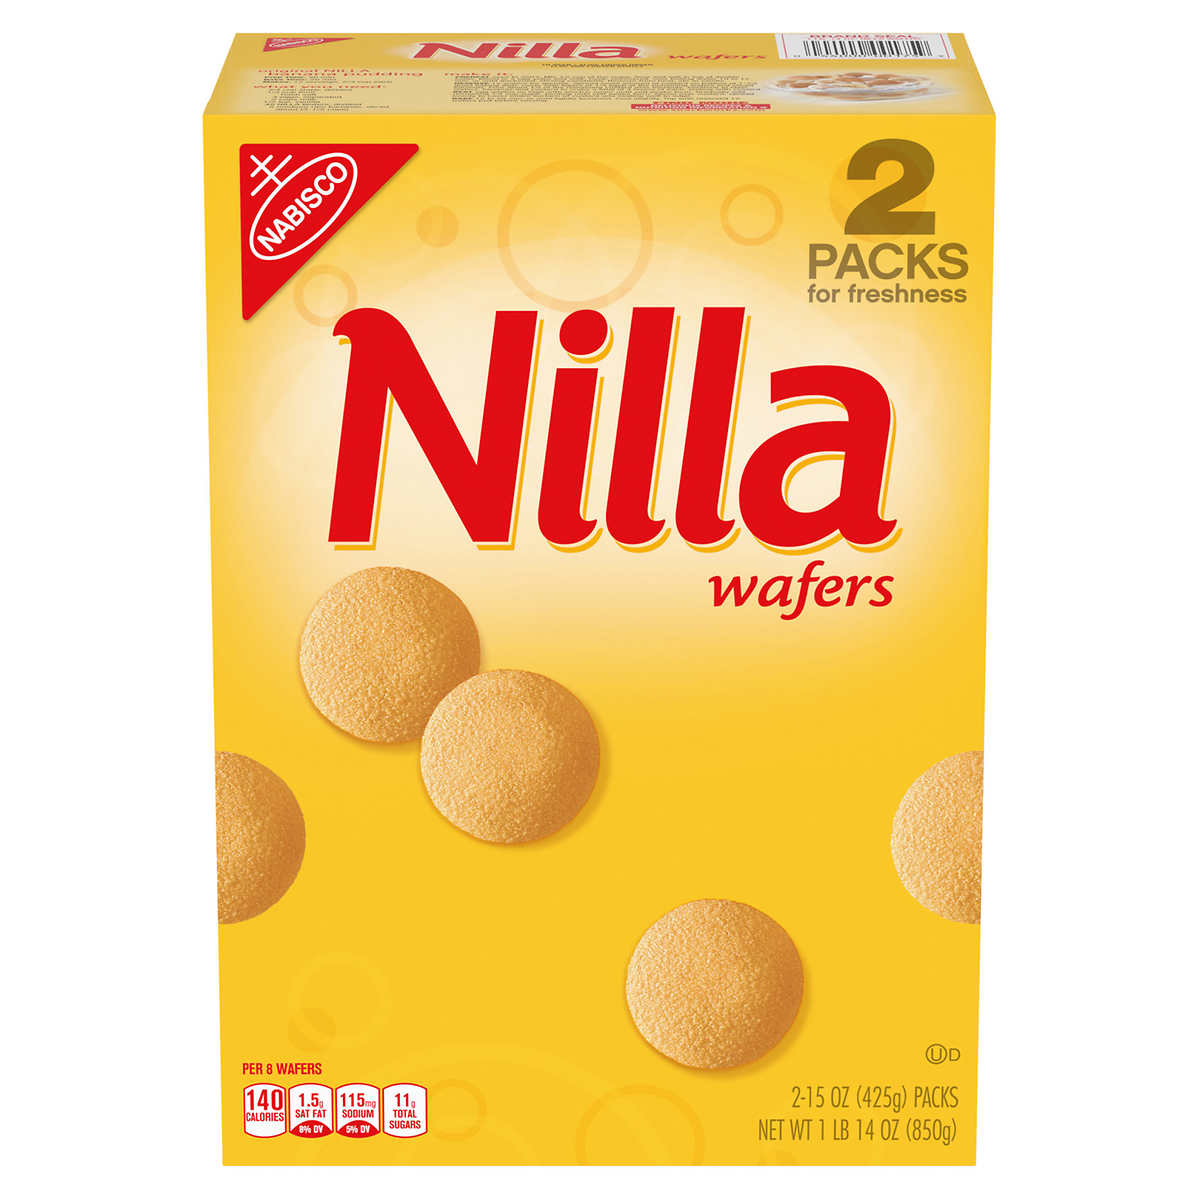 Nilla Wafers Cookies 15 Oz 2 Count,Italian Beans